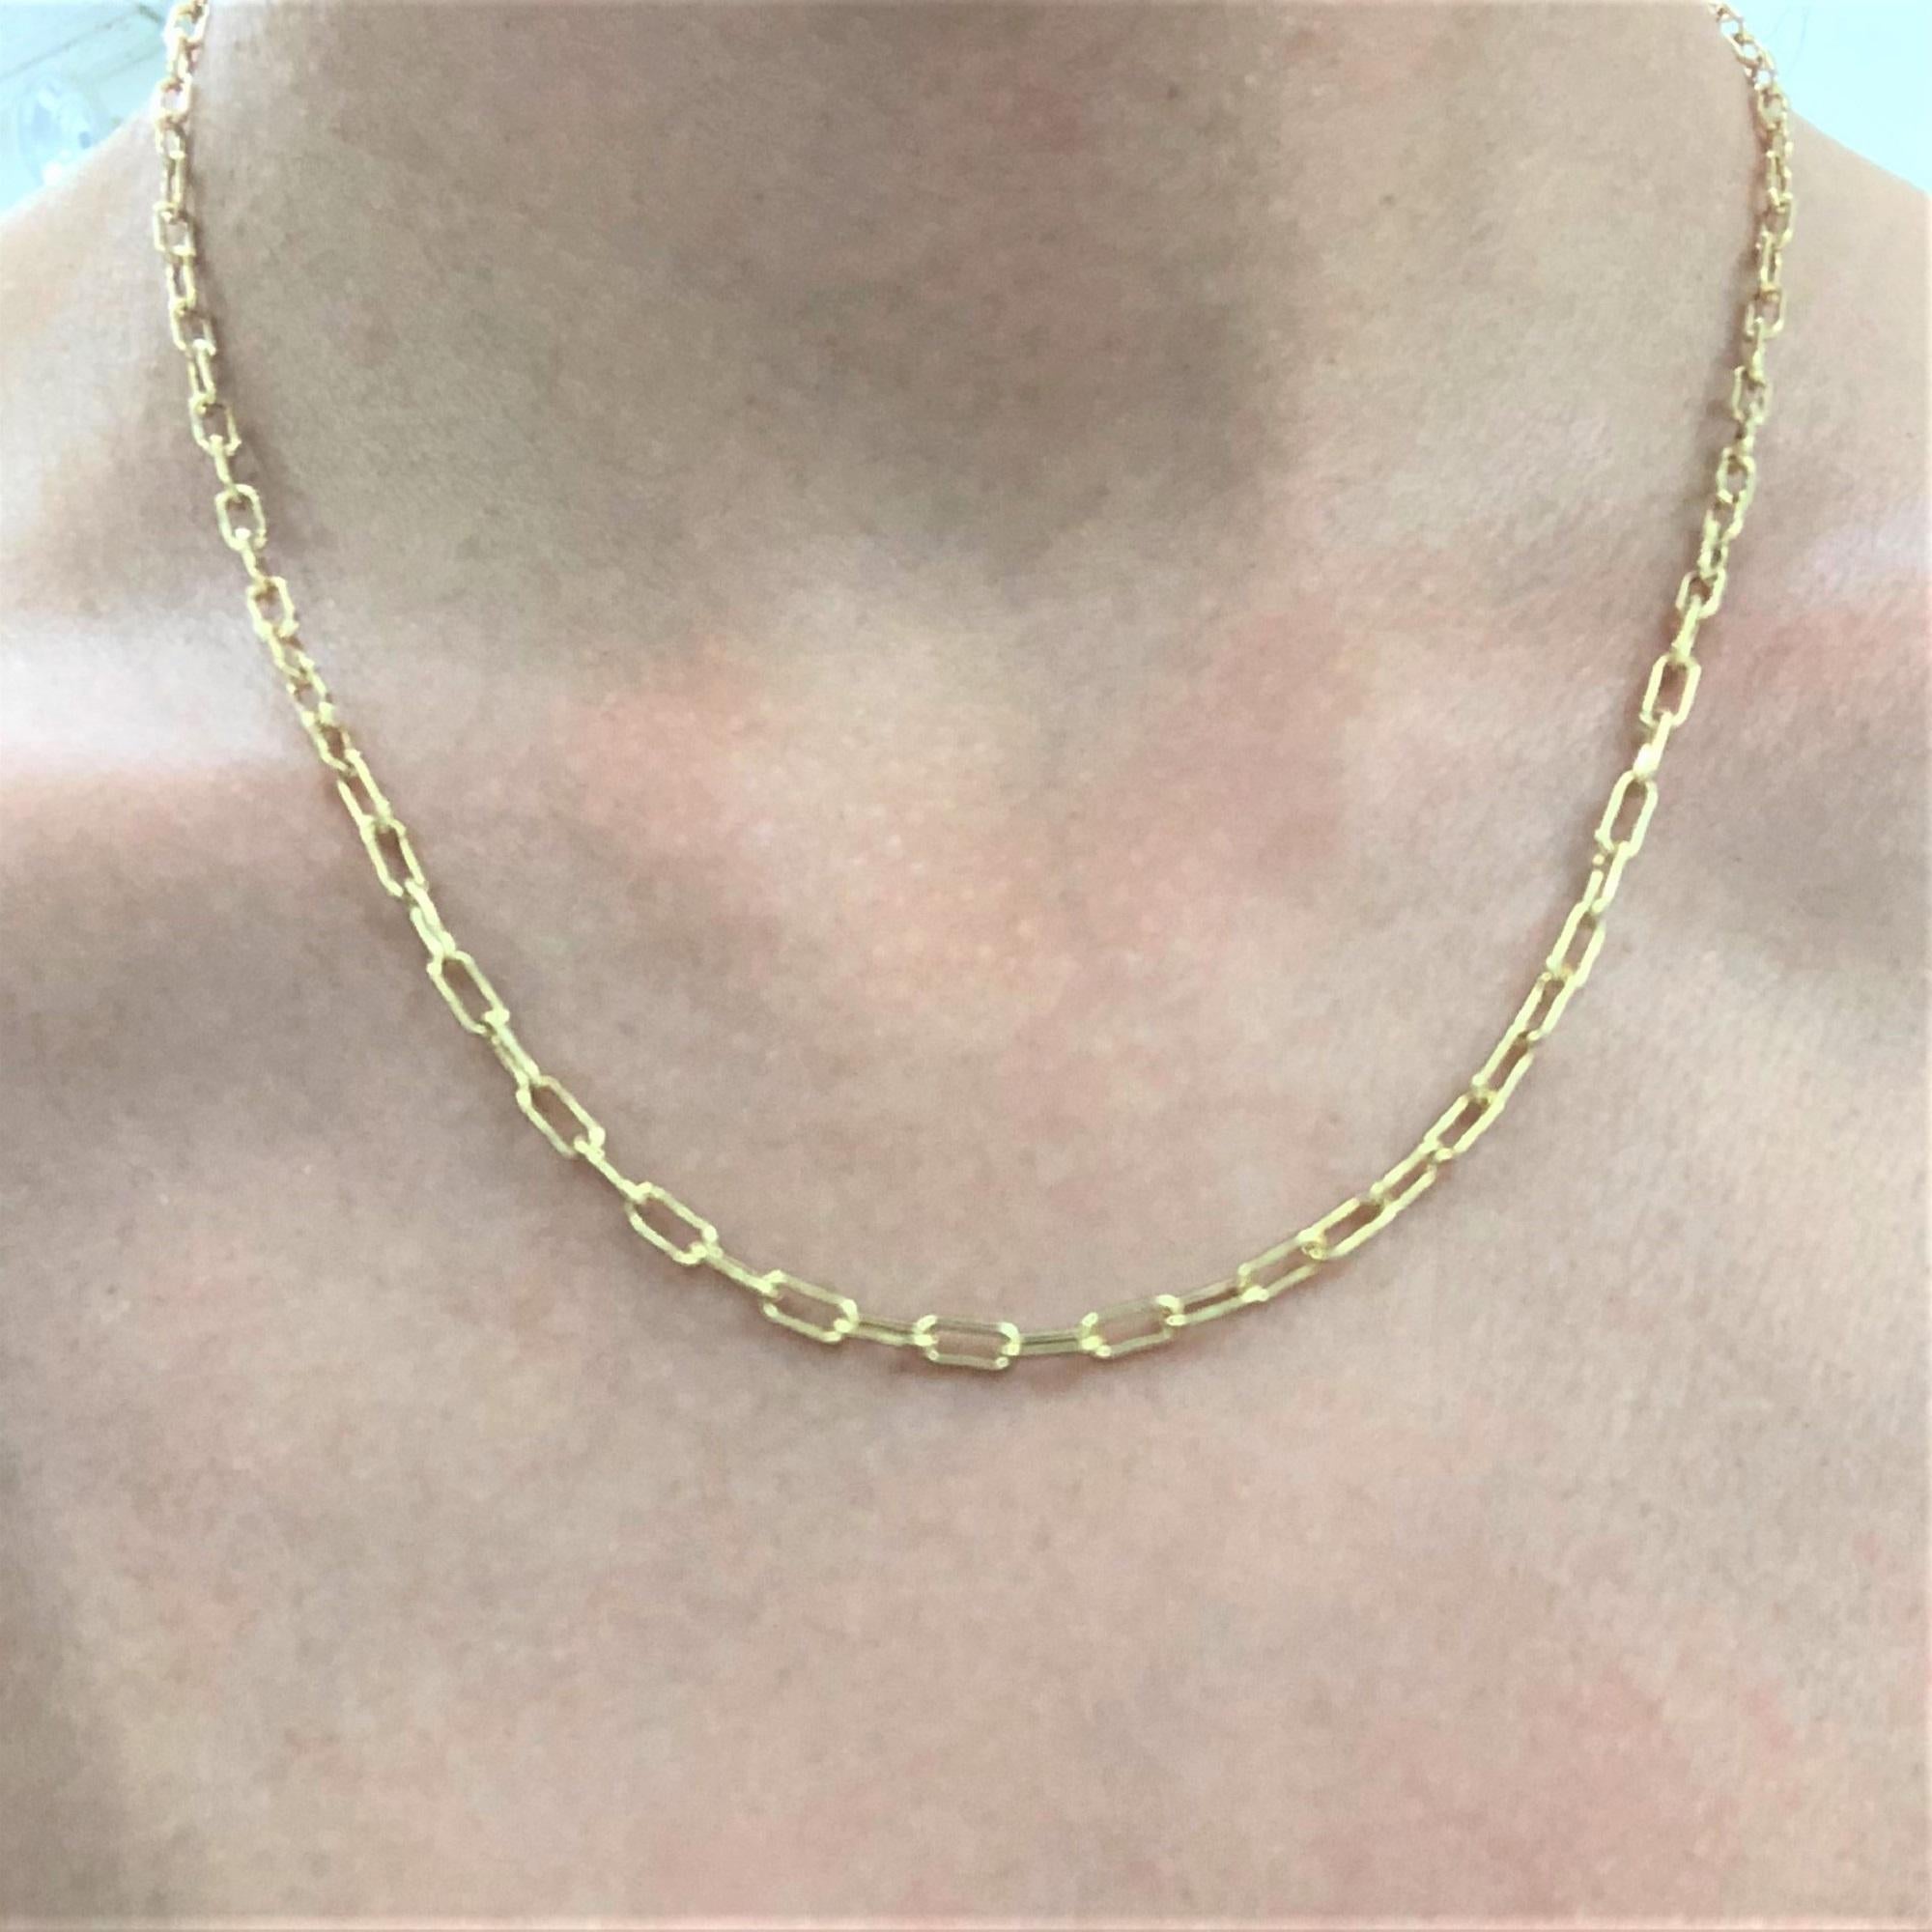 Chain necklaces are a classic staple in any person's jewelry box! This 14k yellow gold Small Oval paper-clip chain necklace comes with plenty of options, specifically your choice of length. Buy one and wear it as a simple standalone (with or without